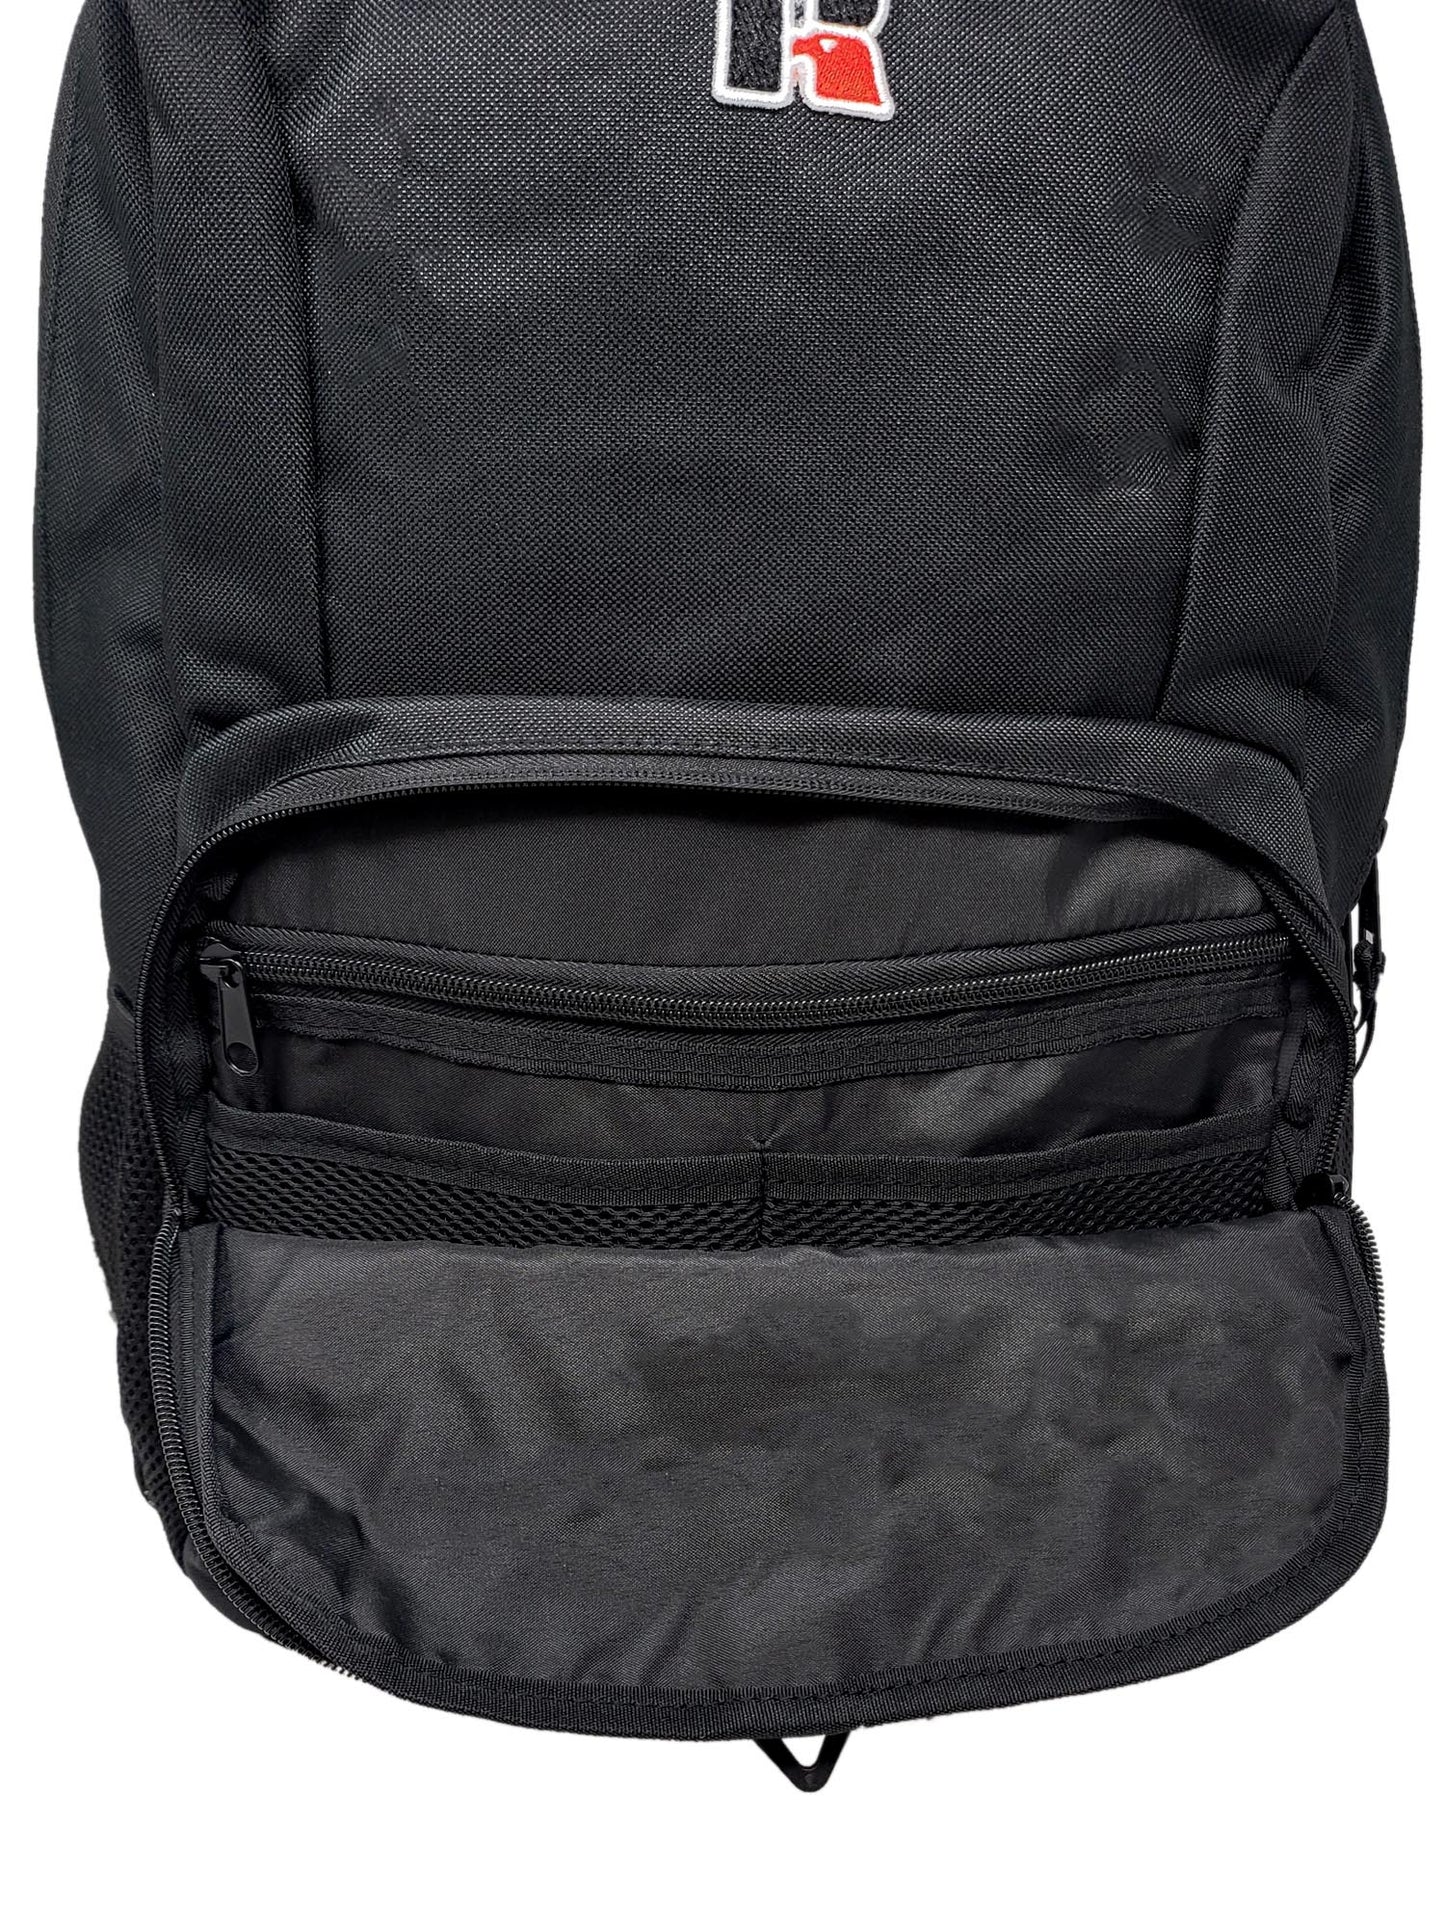 18" Laptop Backpack Black with Sleeve Pockets Kids Teens Adults Durable